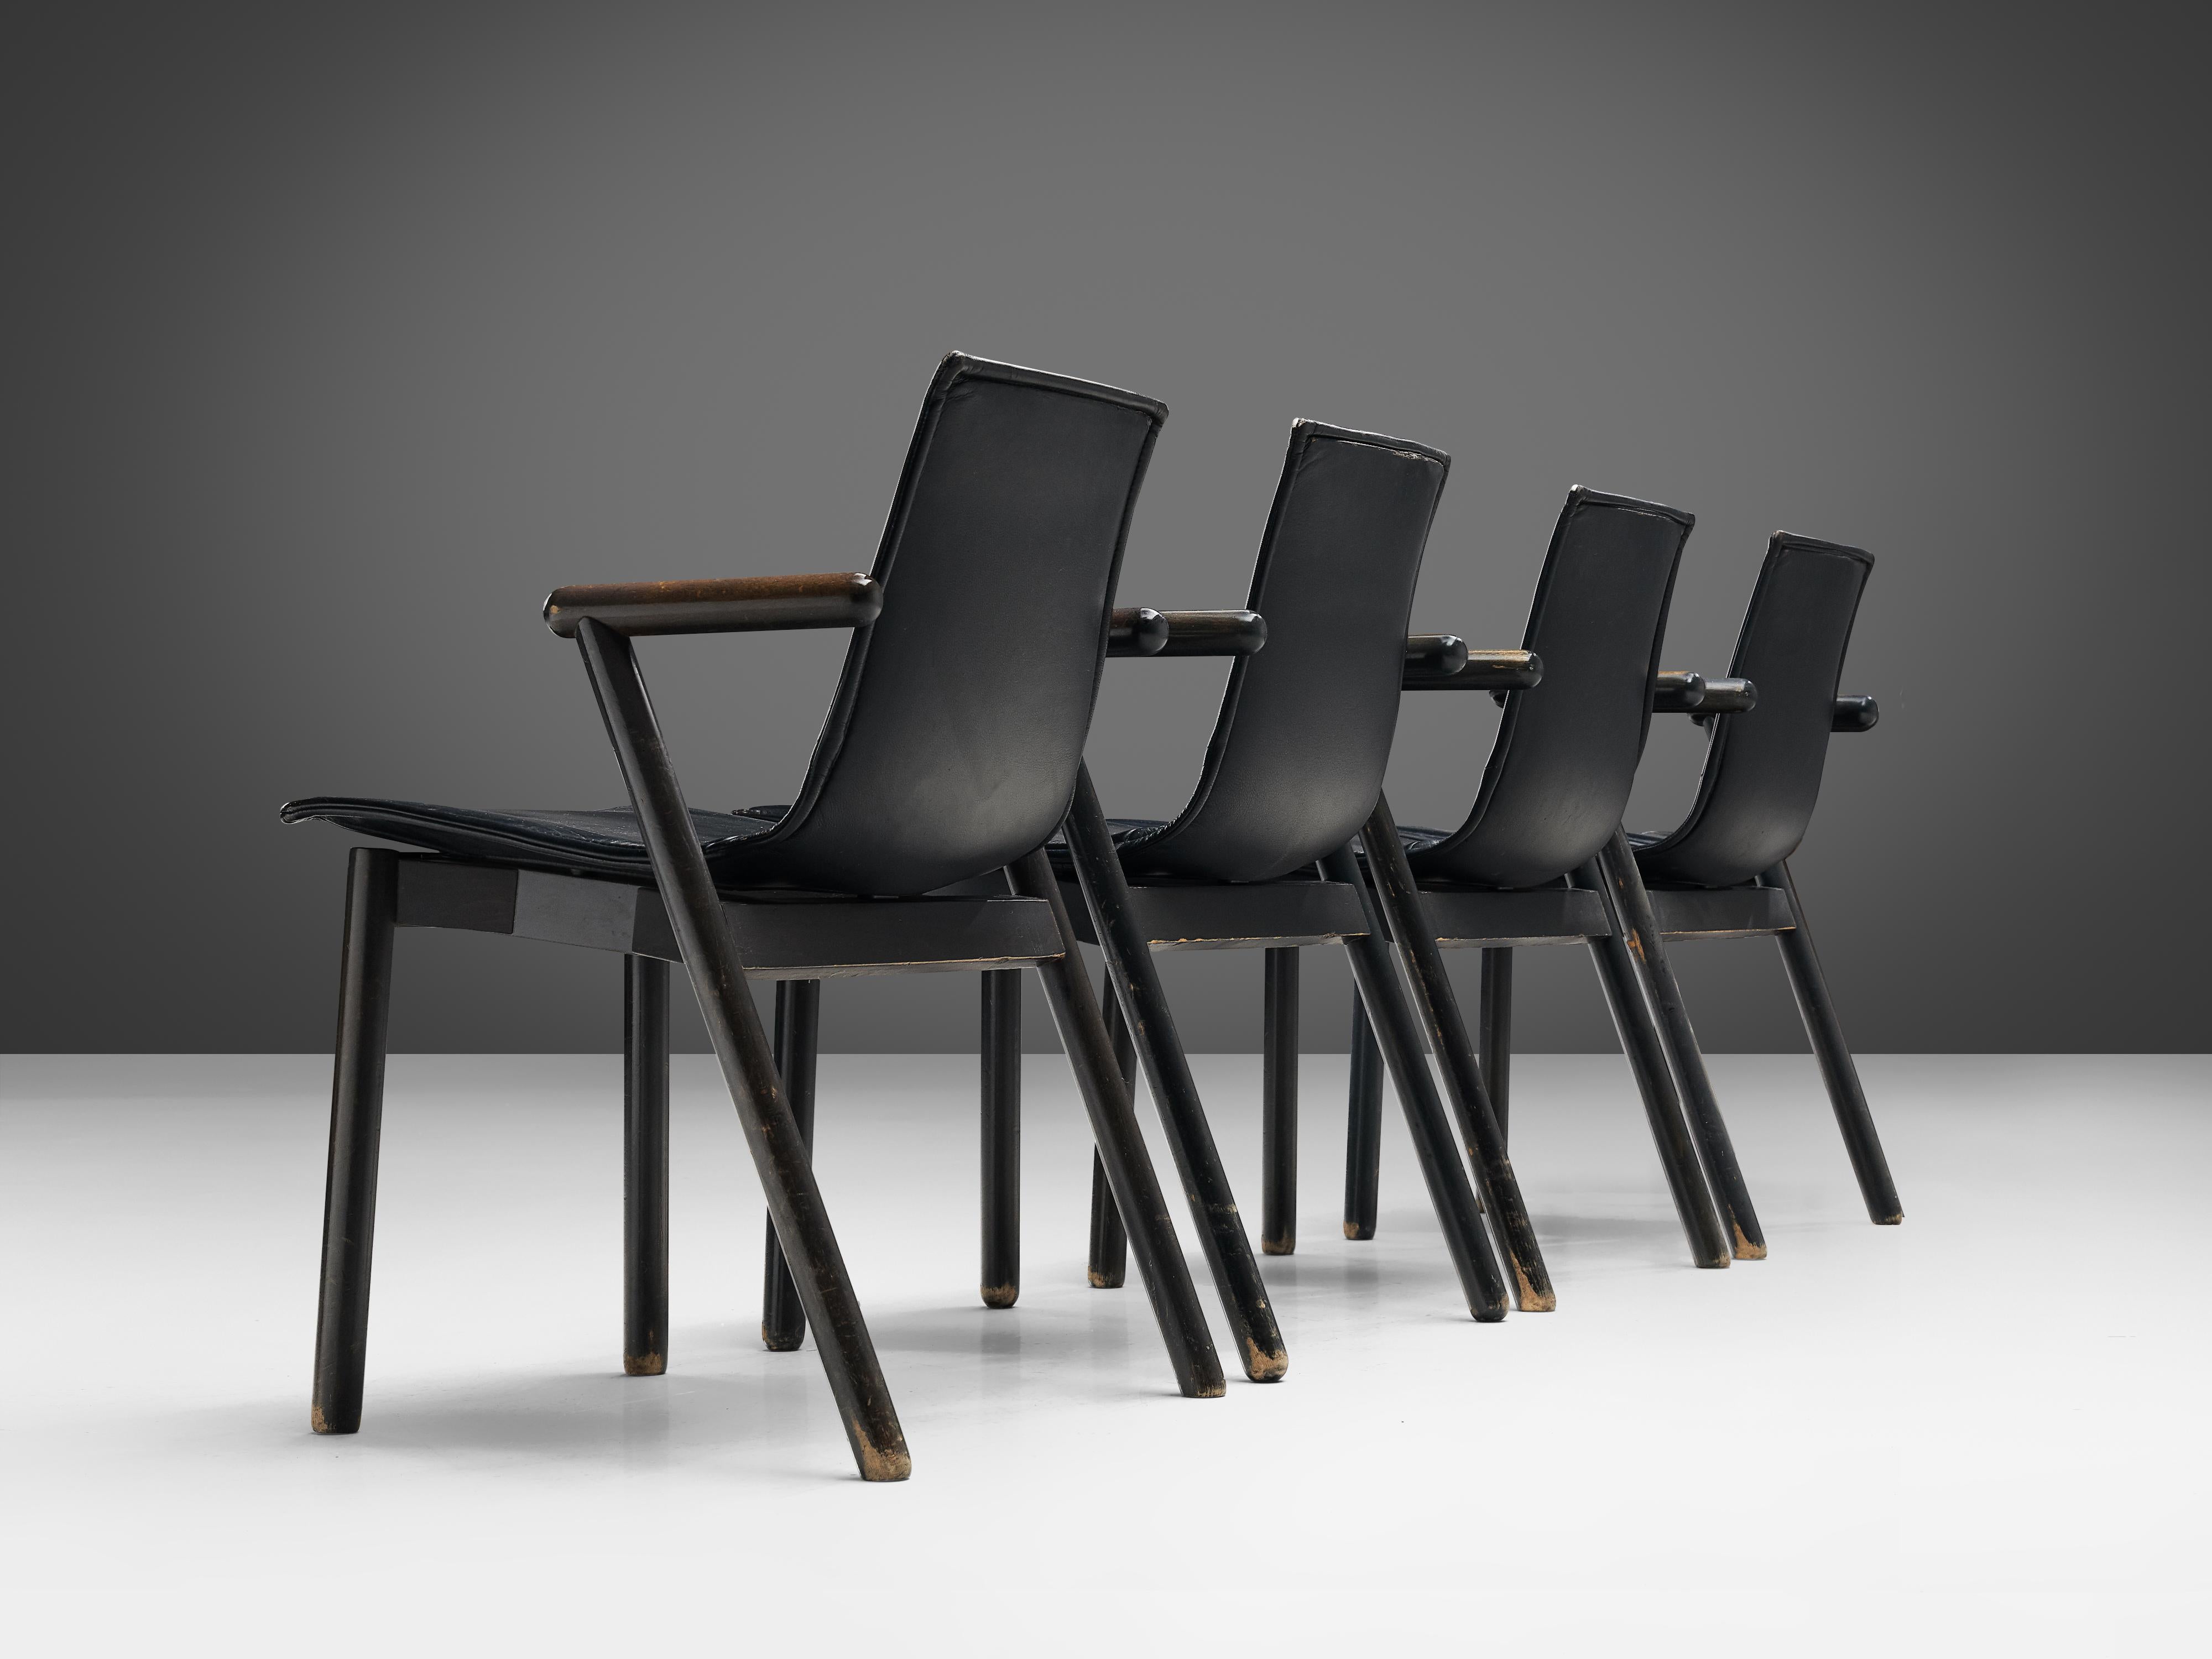 Vico Magistretti for Cassina, dining chairs model 'Villabianca', leather and wood, Italy, 1985

Designed by Vico Magistretti and produced by Cassina, this large set of armchairs shows strong shapes and lines. The frame features cylindrical legs on